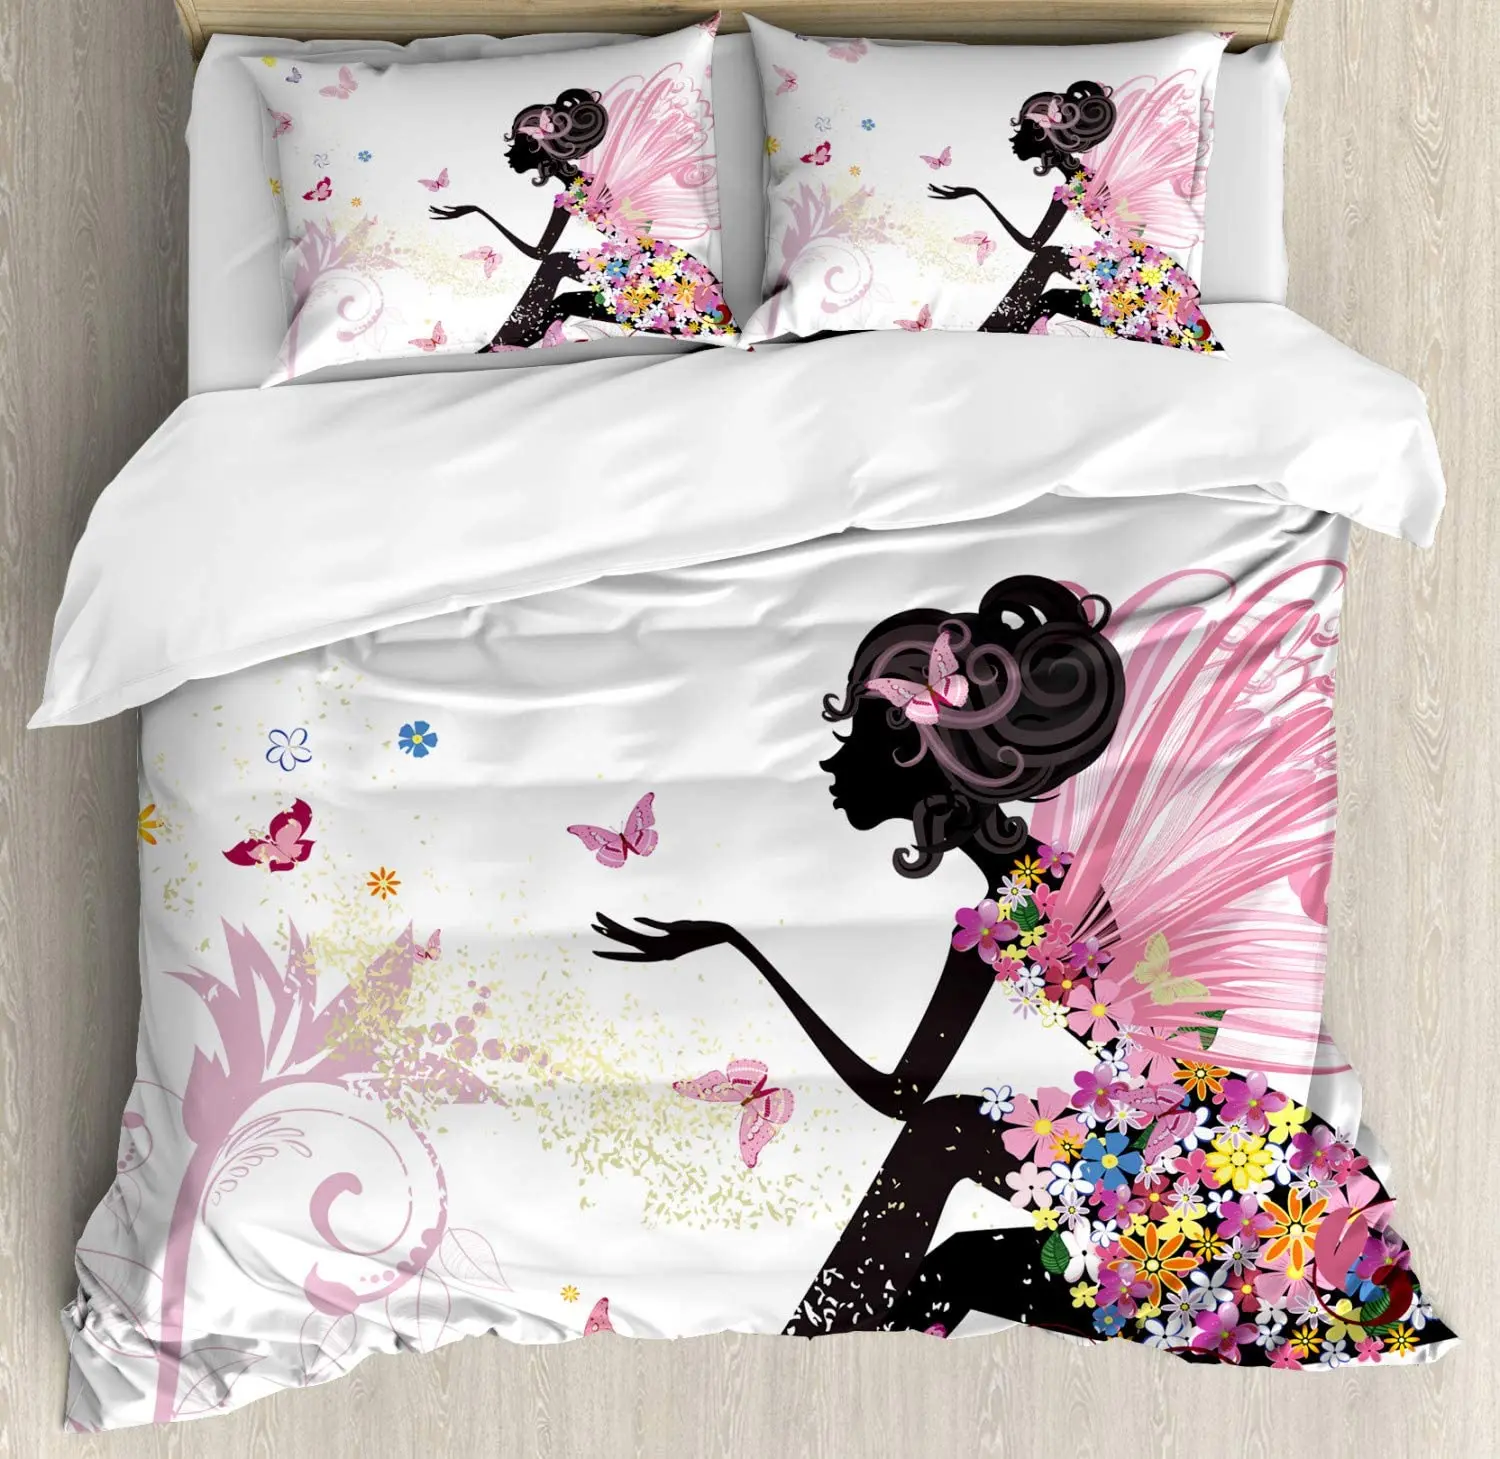 

Ambesonne Fantasy Duvet Cover Set, Girl Silhouette in a Floral Dress Surreal Garden Flying Butterflies Print, Decorative